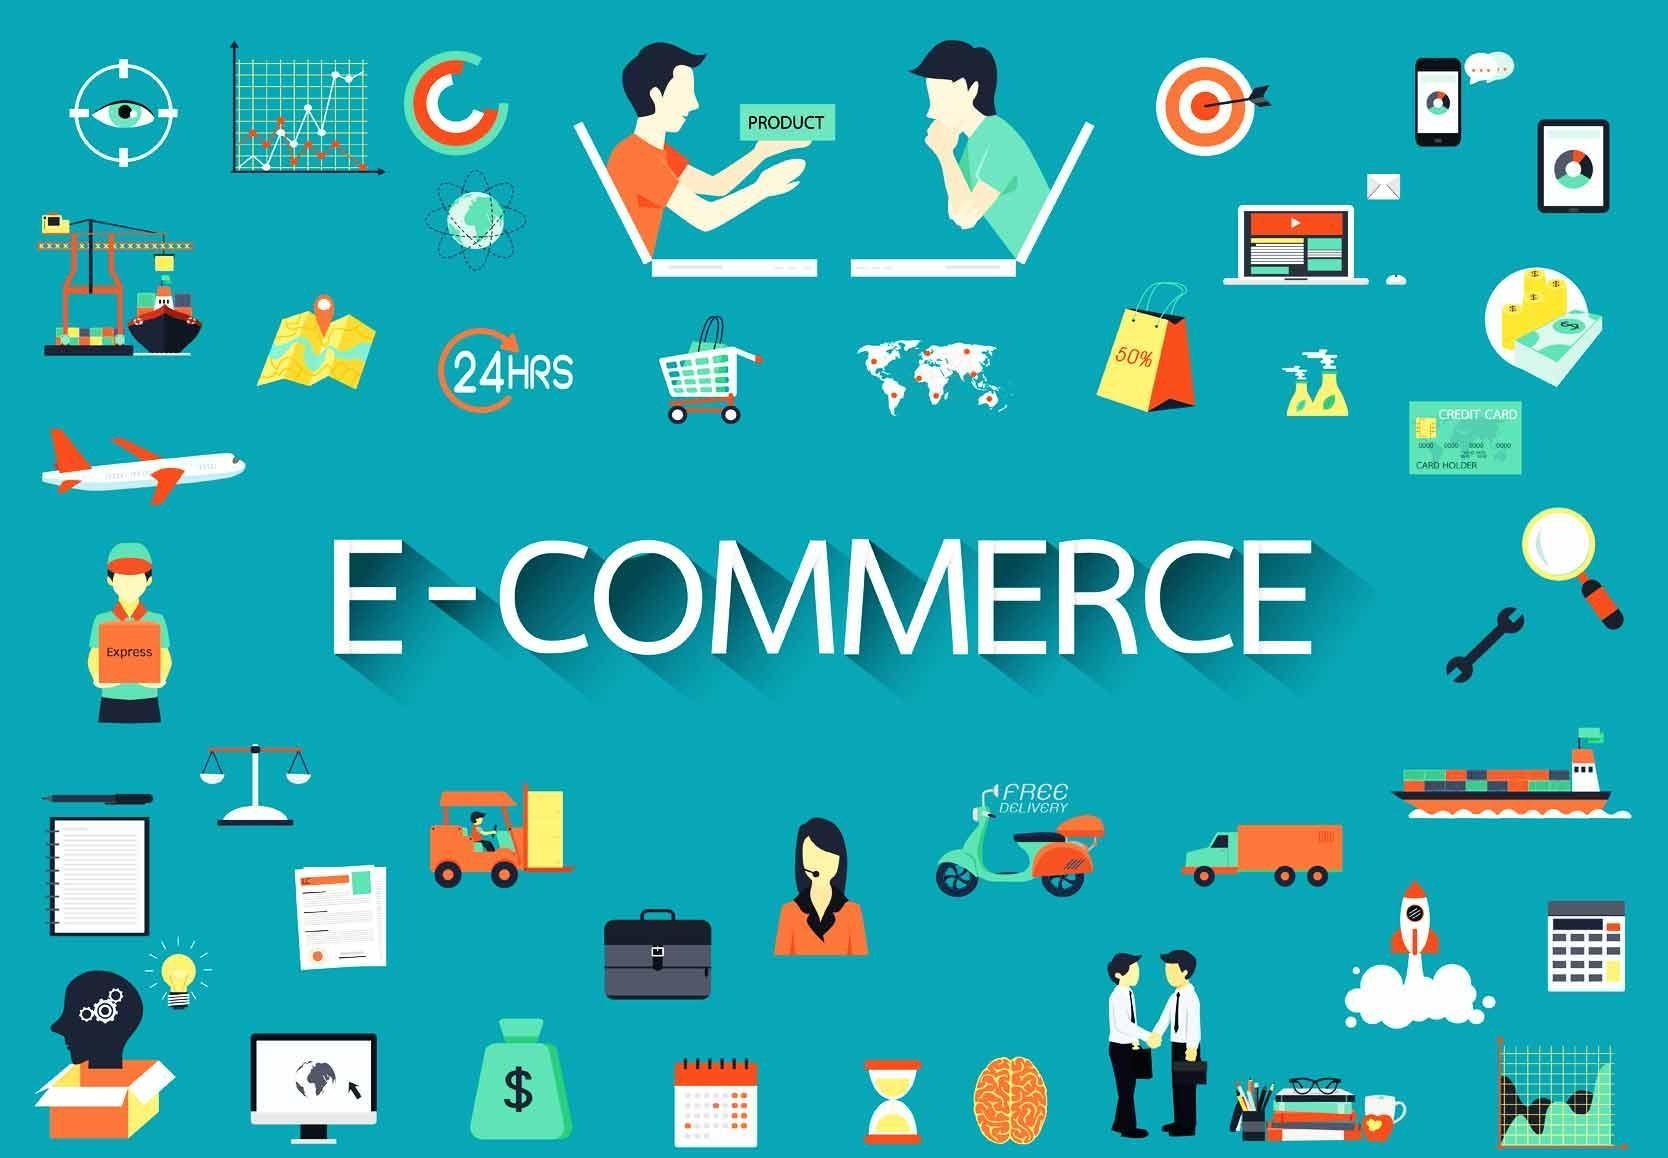 Elements That Will Transform Ecommerce